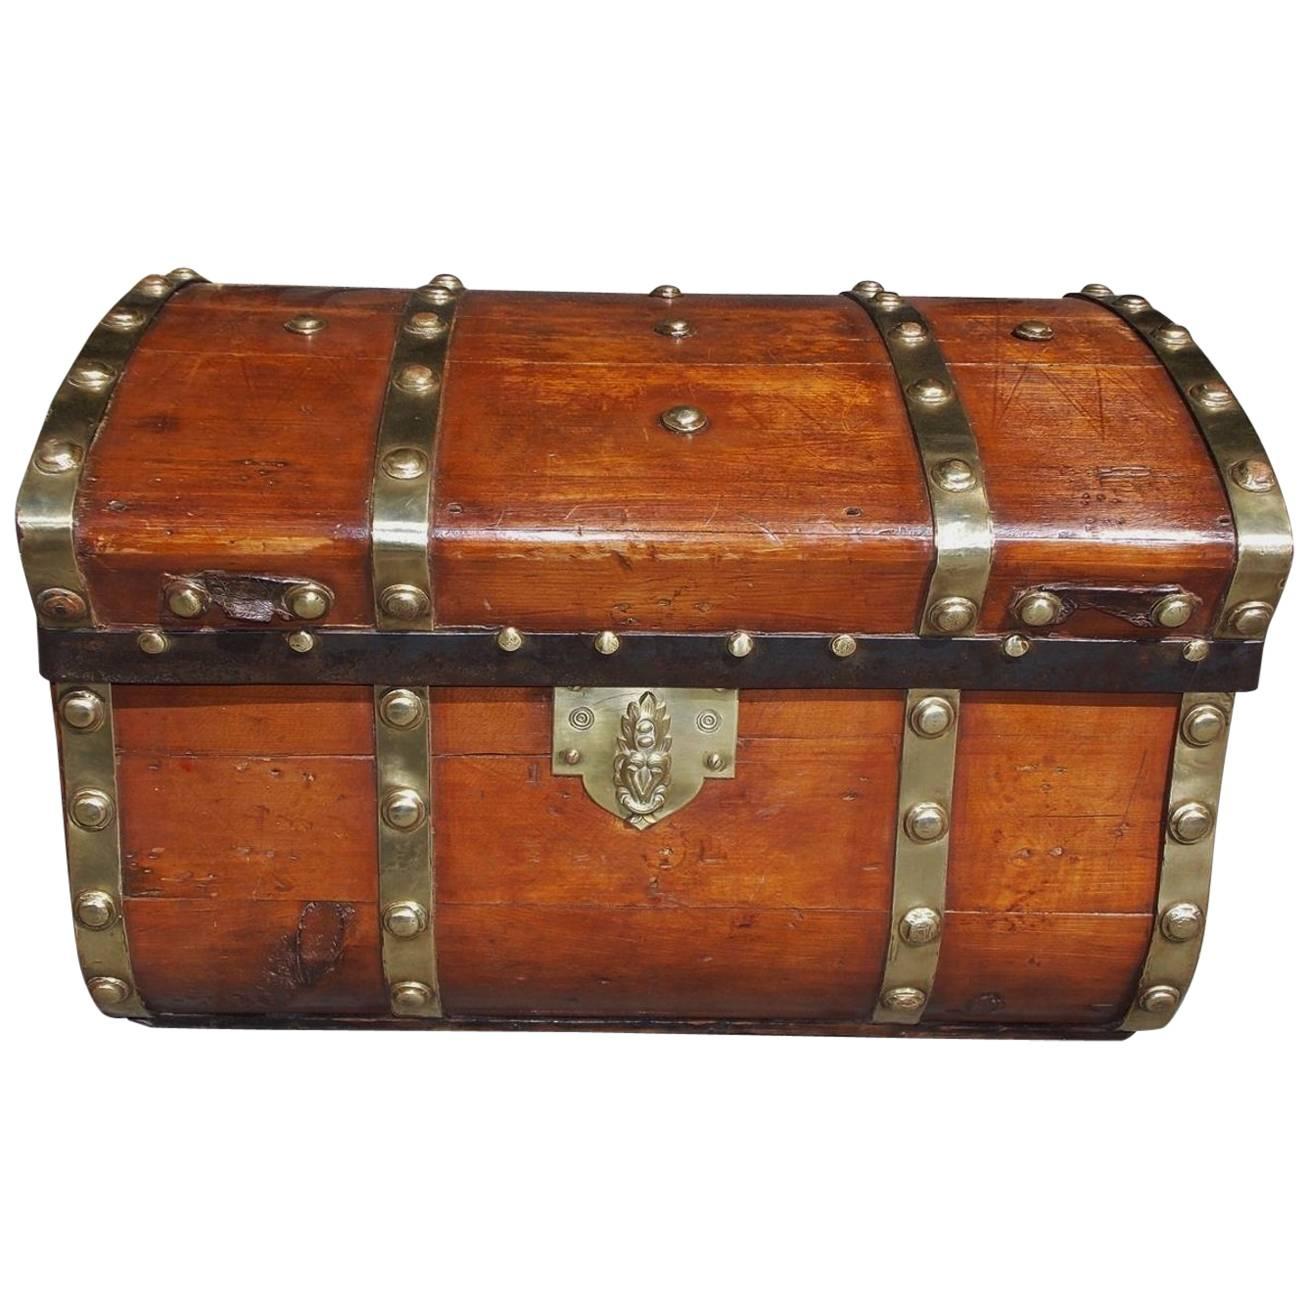 American White Pine Brass and Leather Mounted Traveling Trunk, Circa 1800